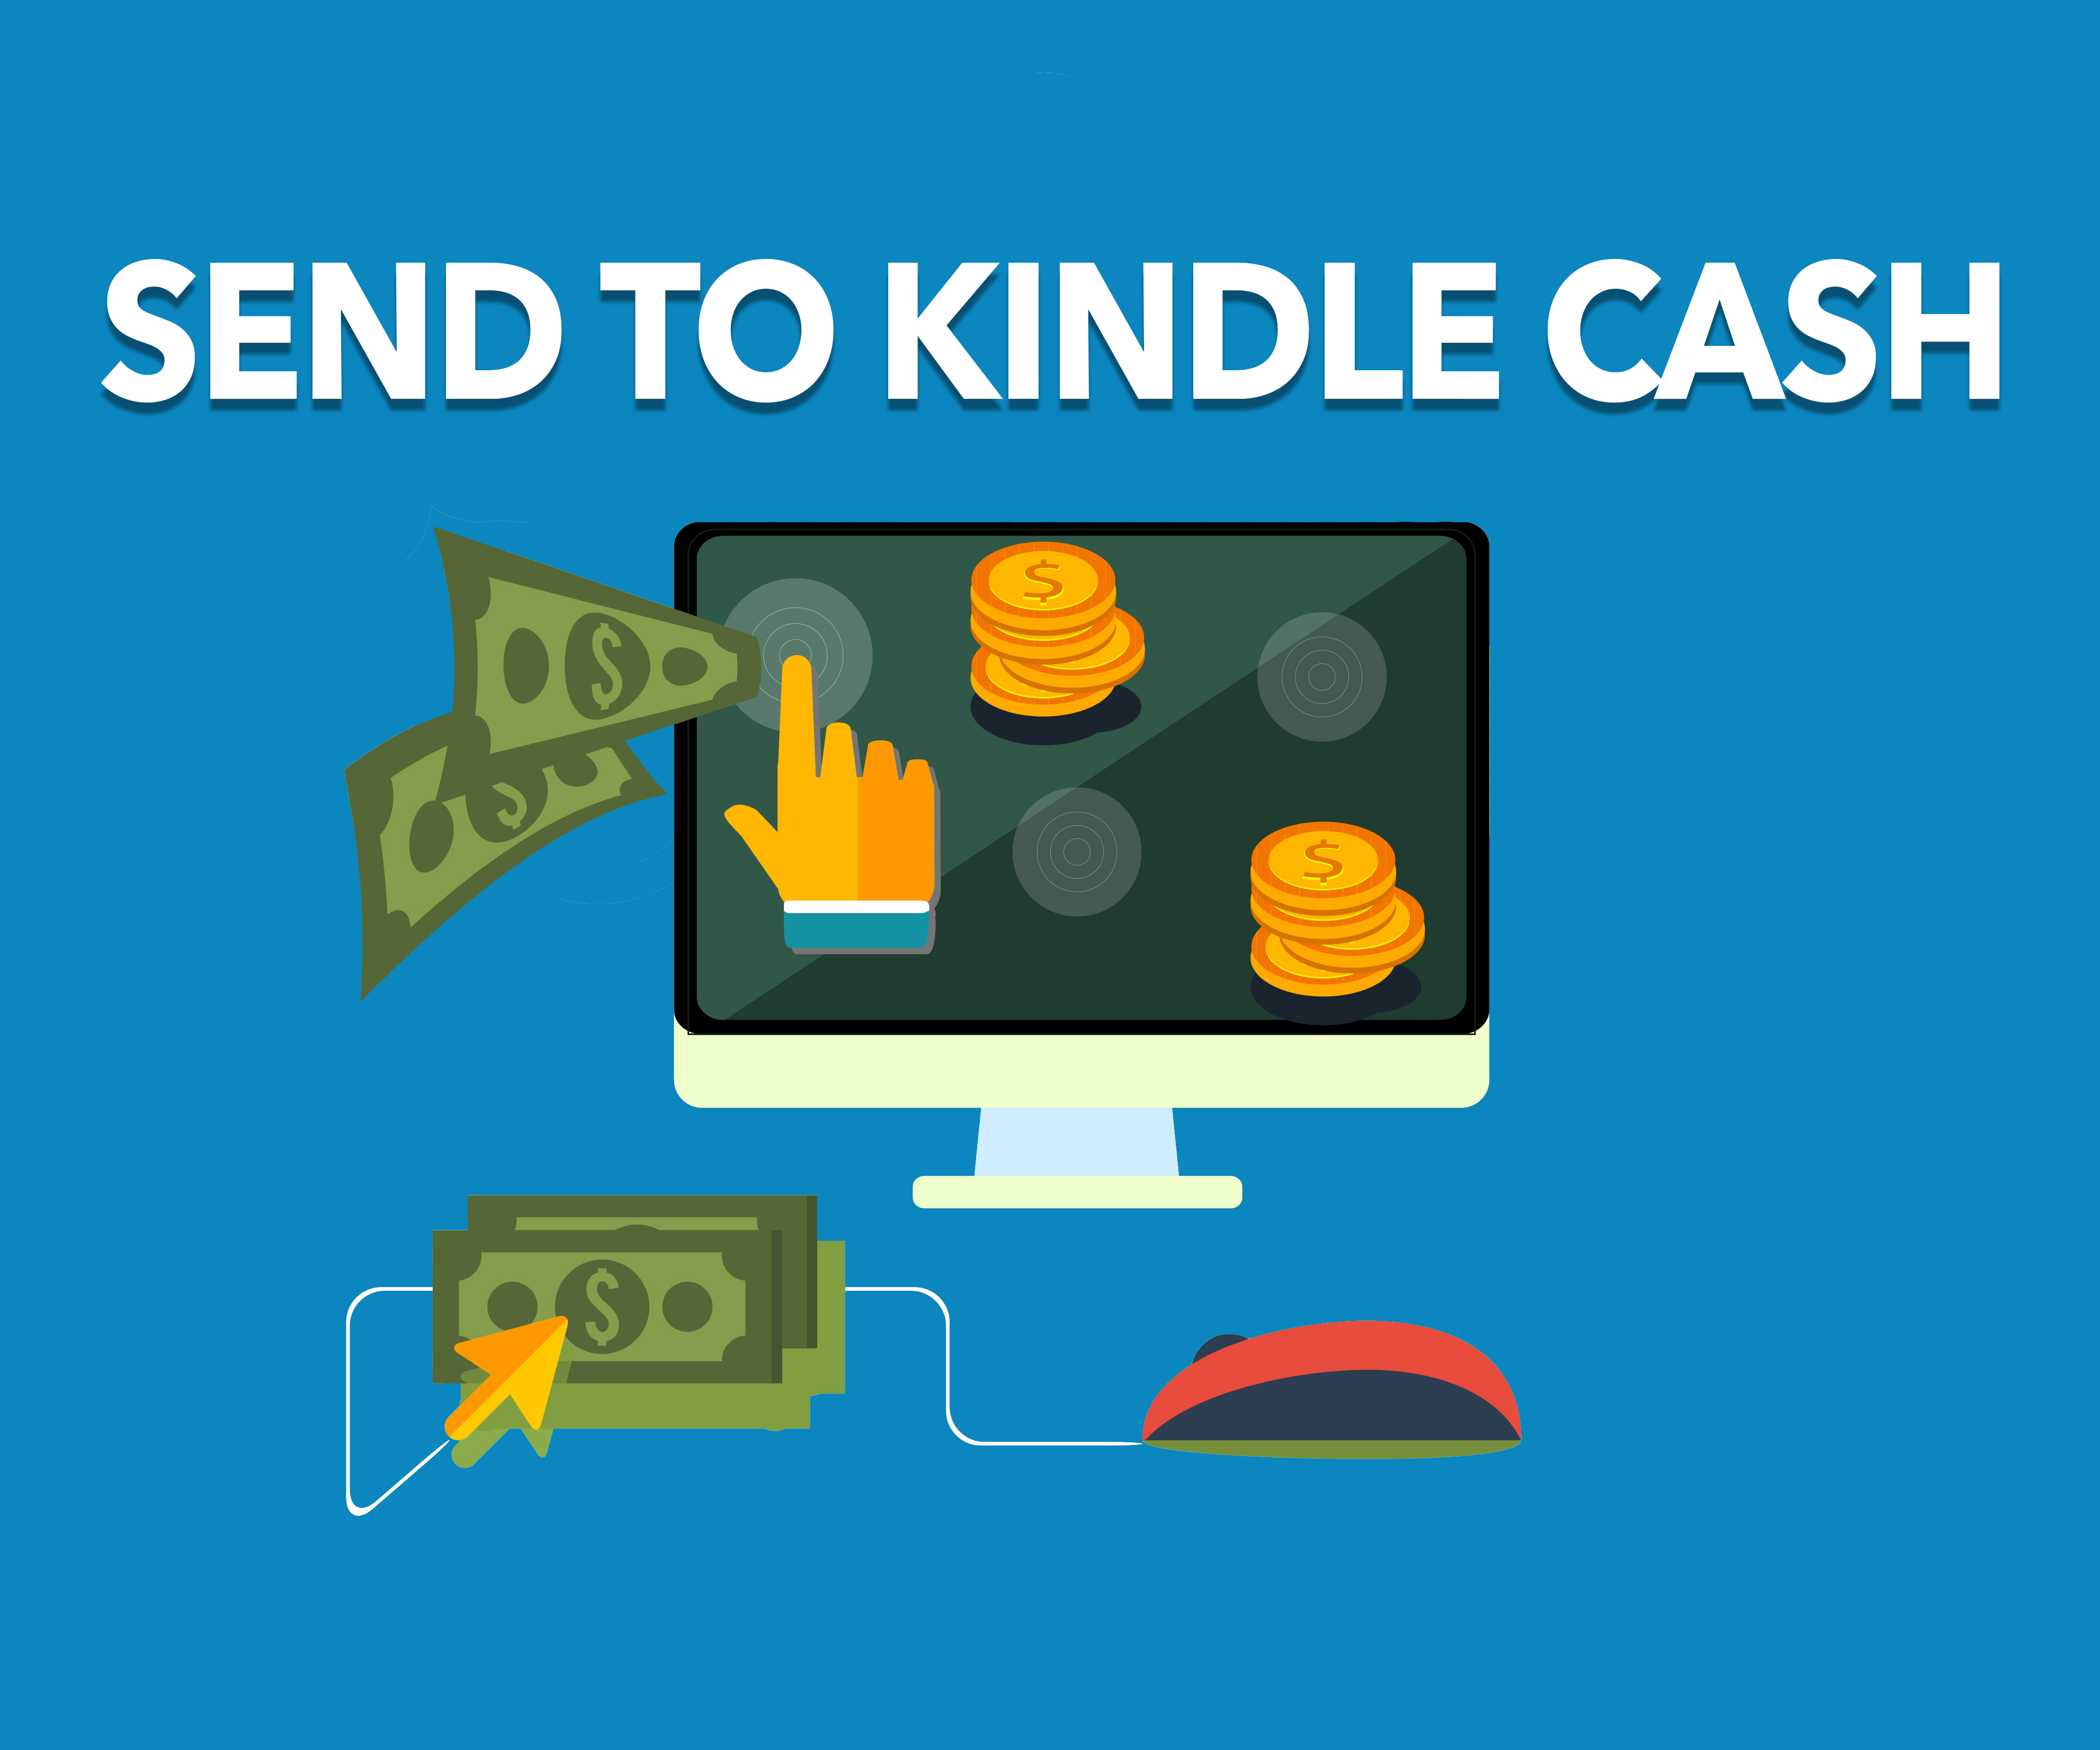 Send to Kindle Cash by Shawn Hansen